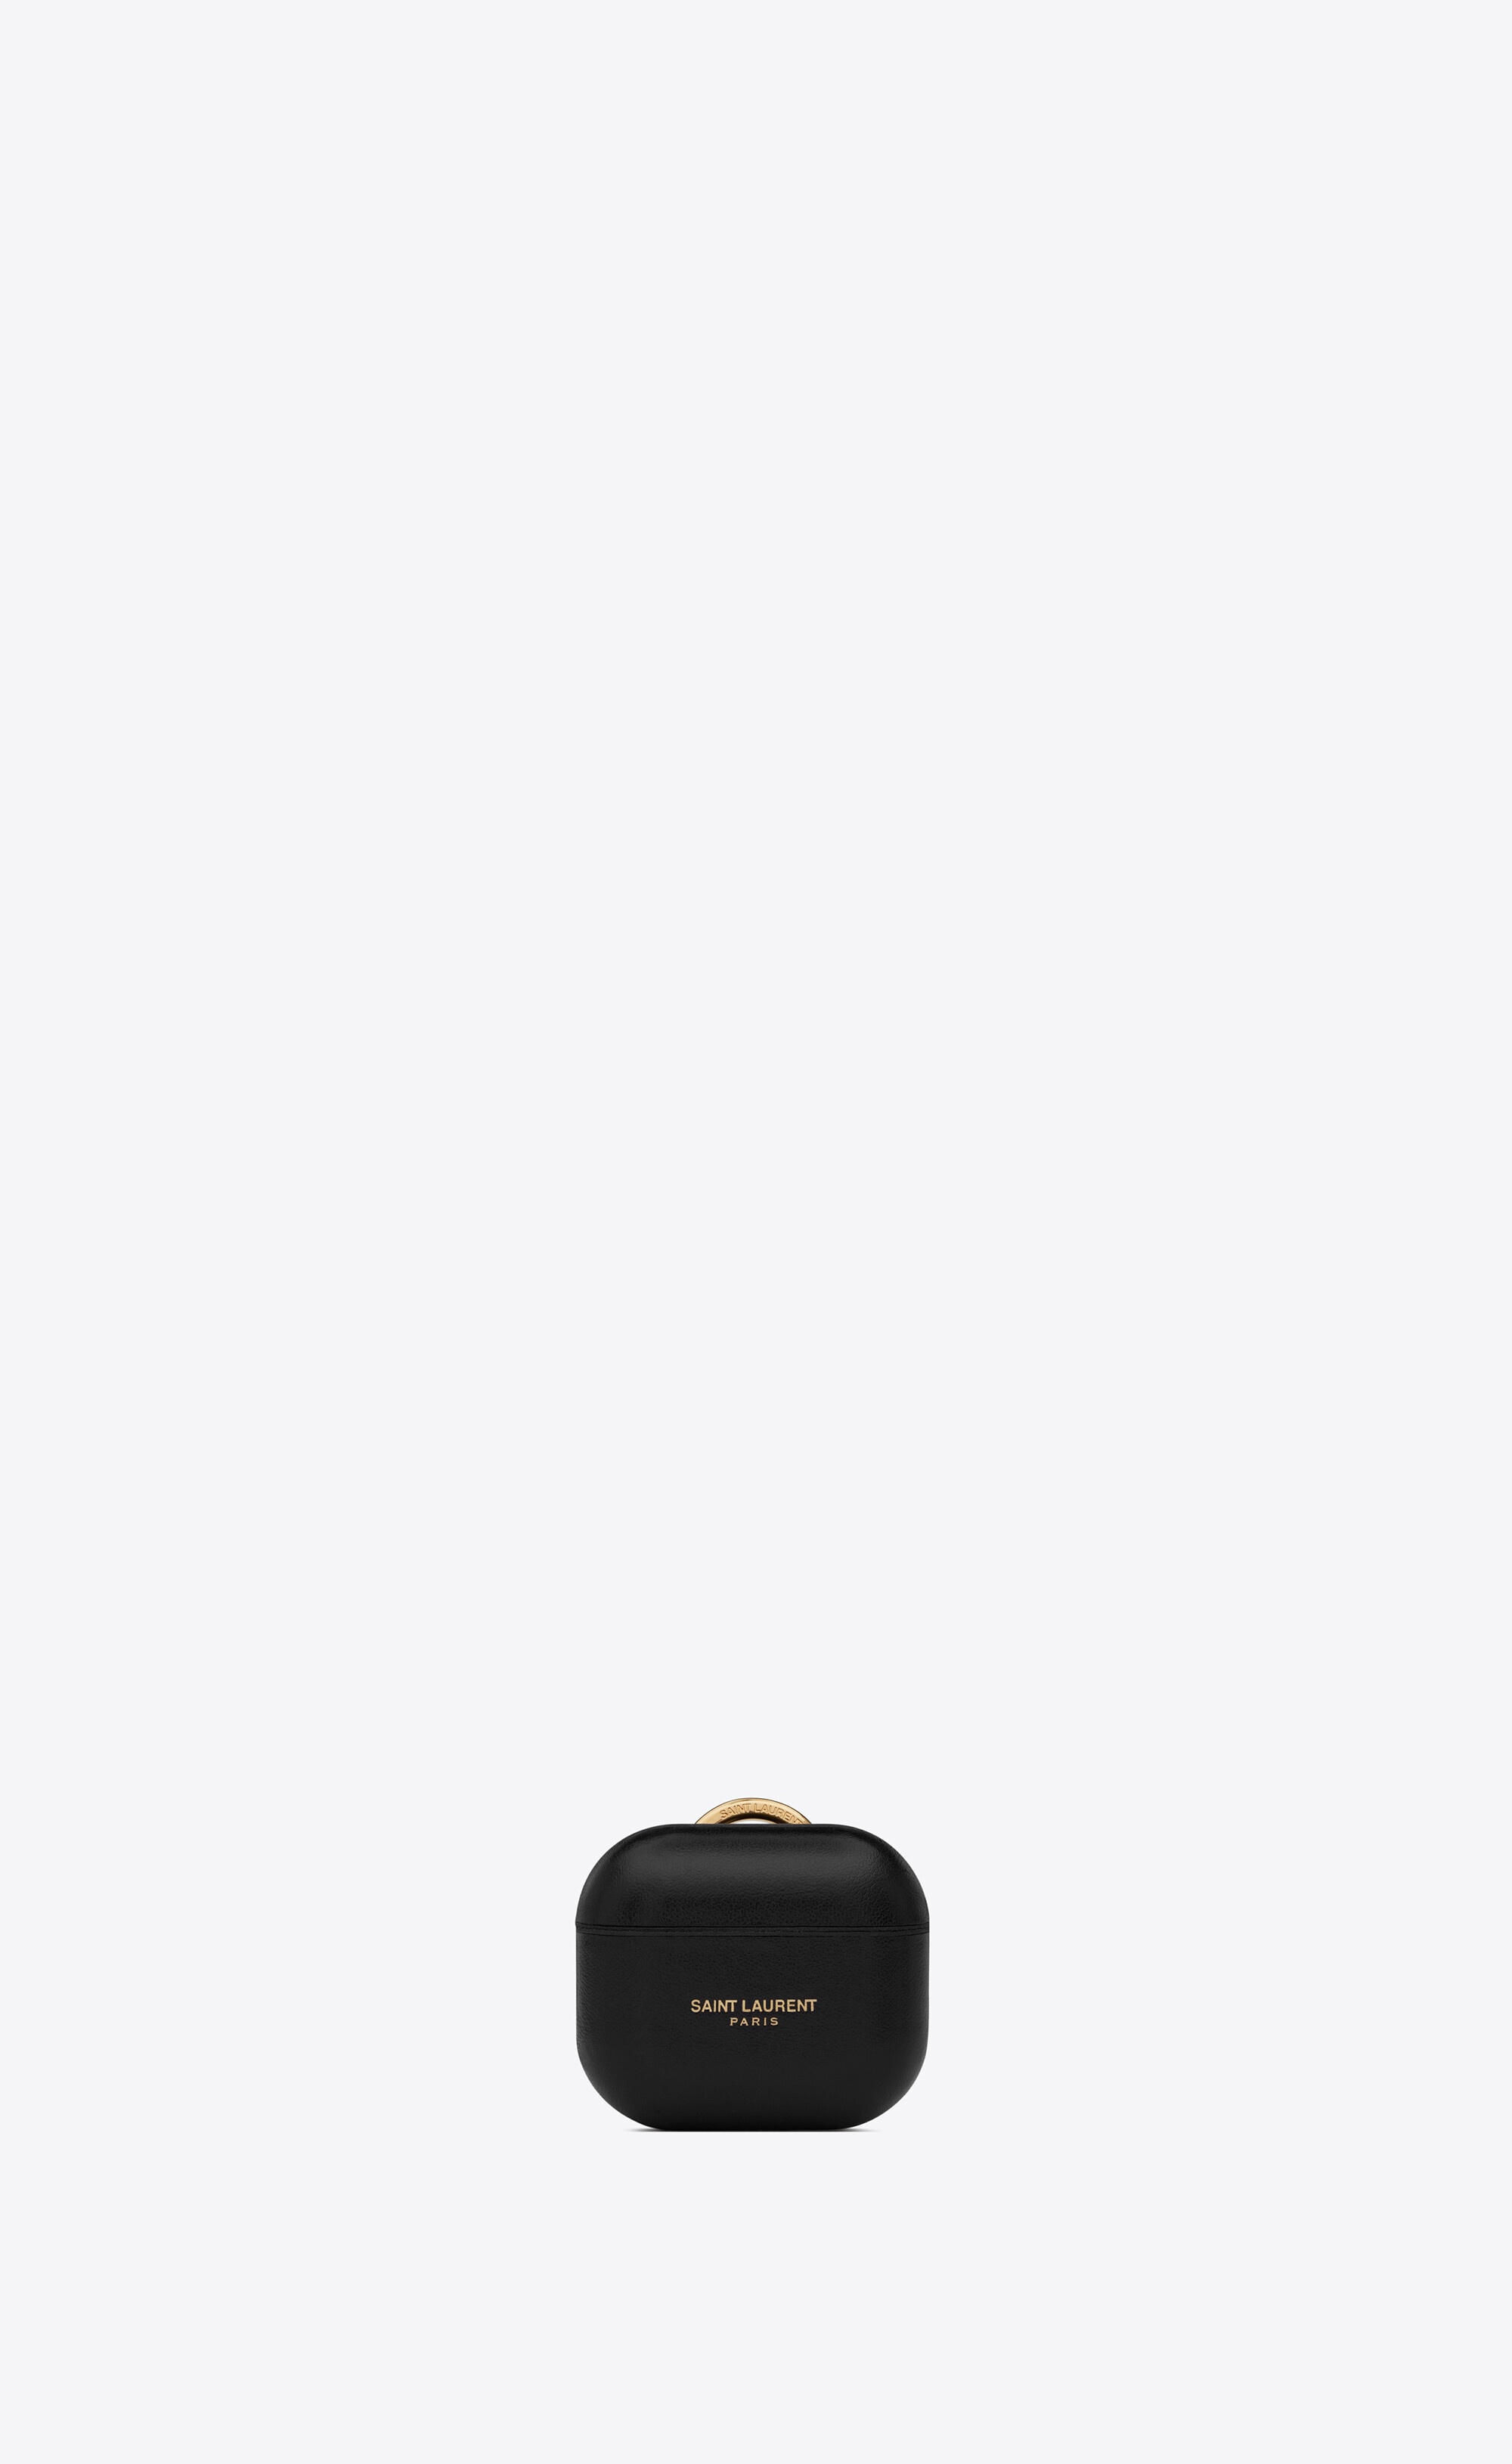 saint laurent paris airpods holder in smooth leather - 1